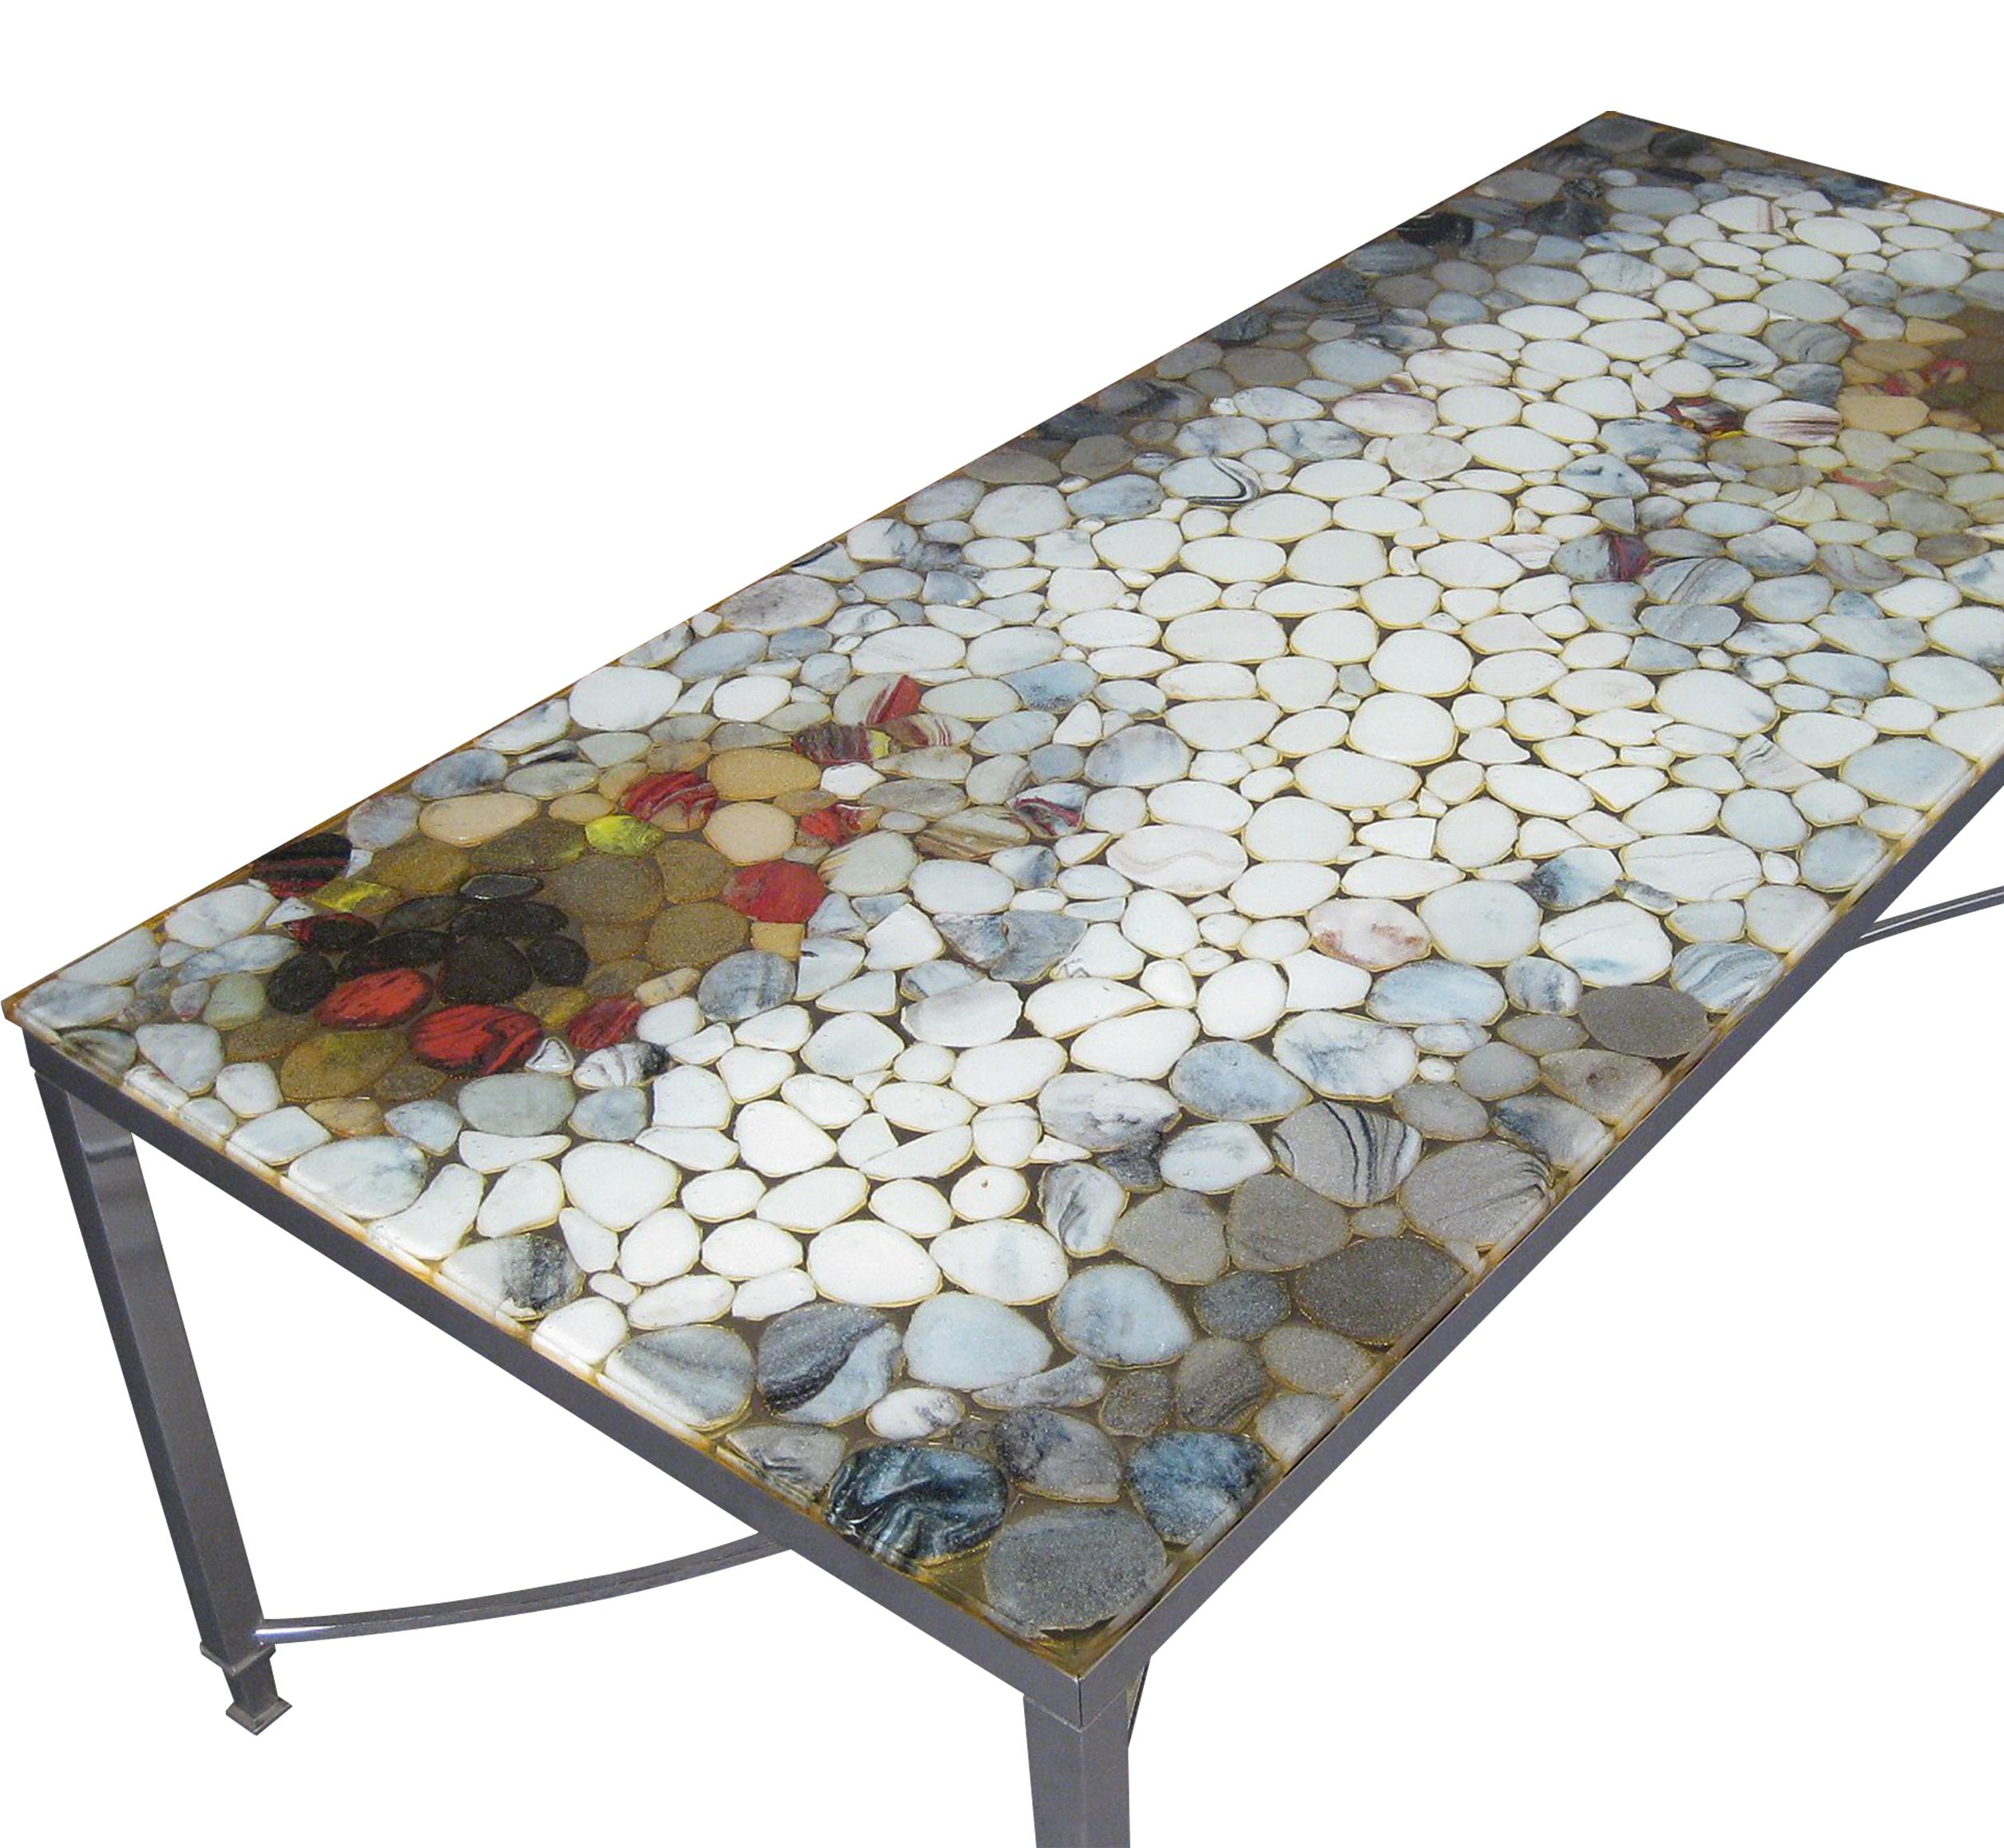 Elegant vibrant rectangular coffee table attributed to Danish designer IB Kofod Larsen. The table is in great condition, the frame is made of chrome plate metal and the top has been created with natural stones of various colours placed in a gradient